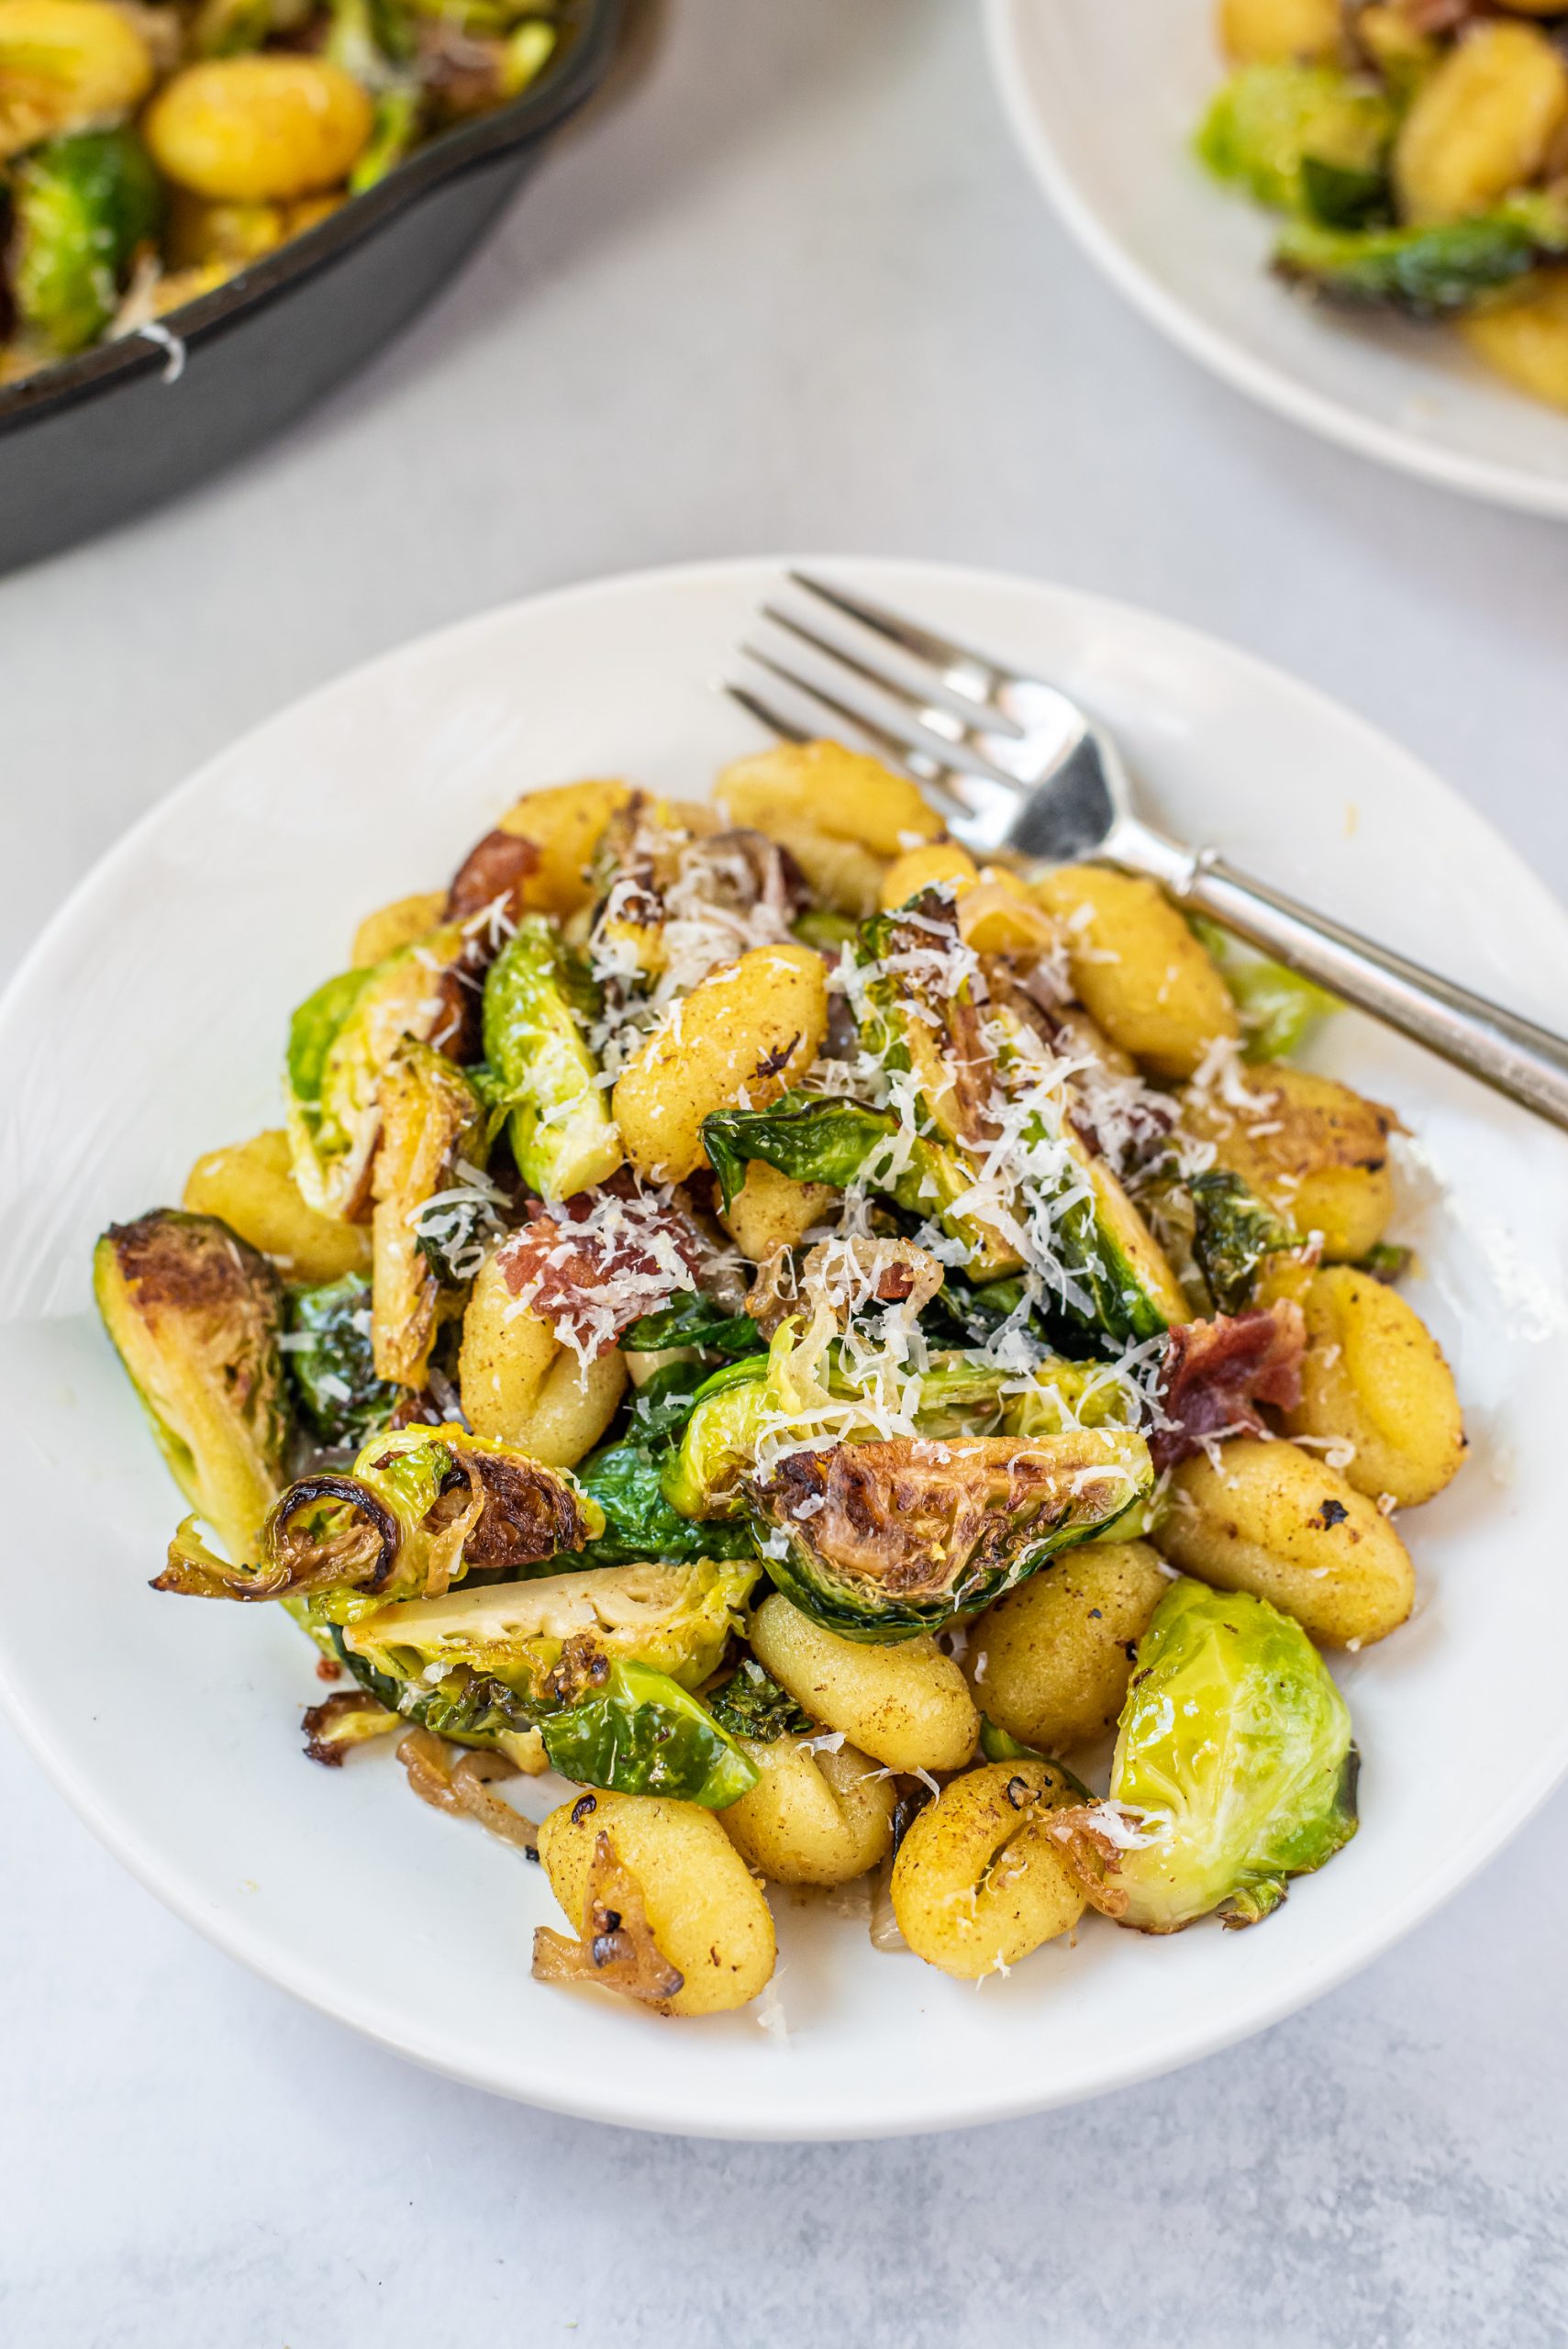 Skillet Gnocchi with Brussels Sprouts